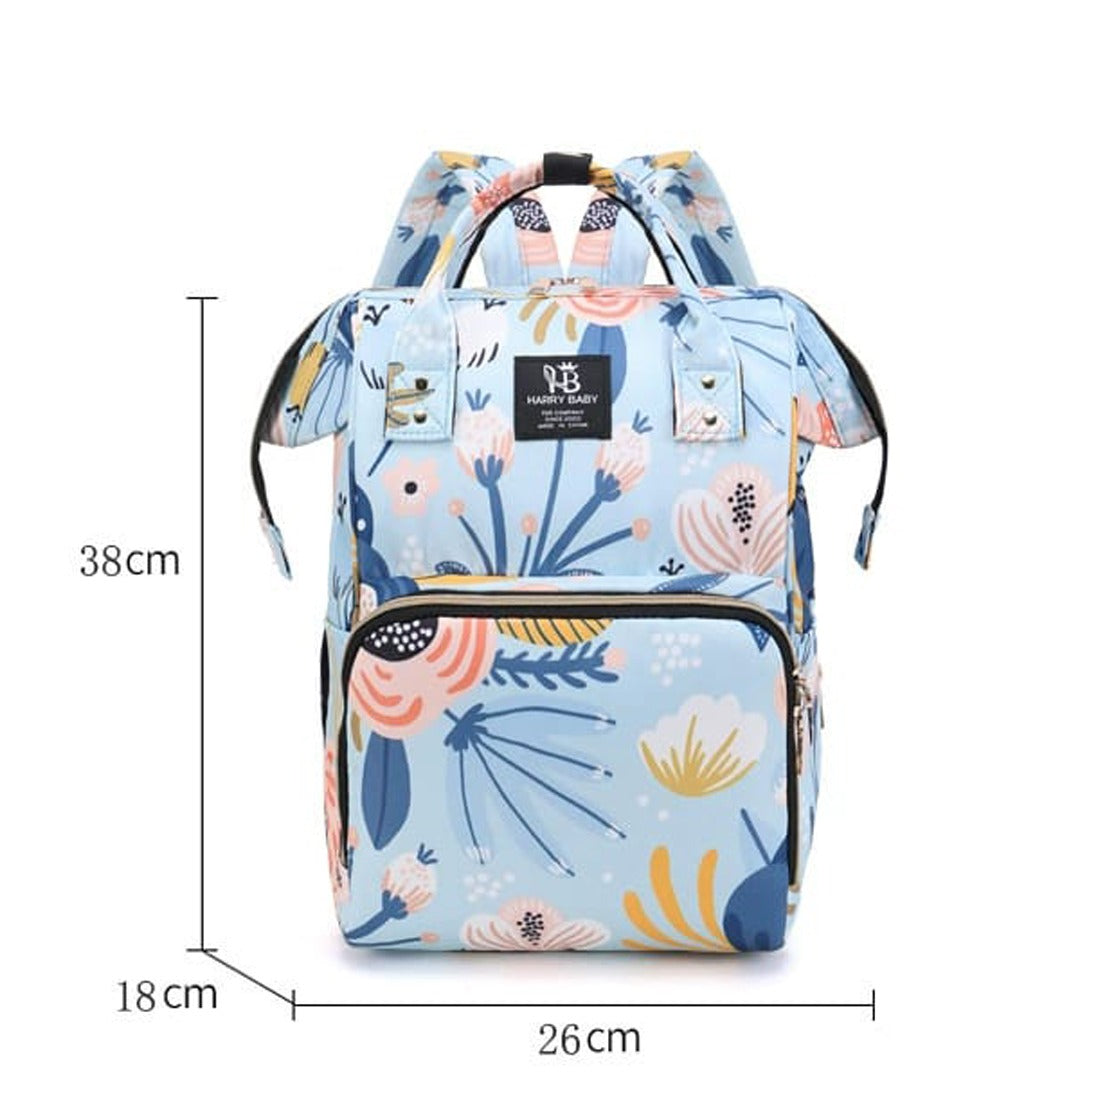 Showcasing Mother Backpack Bag with its size